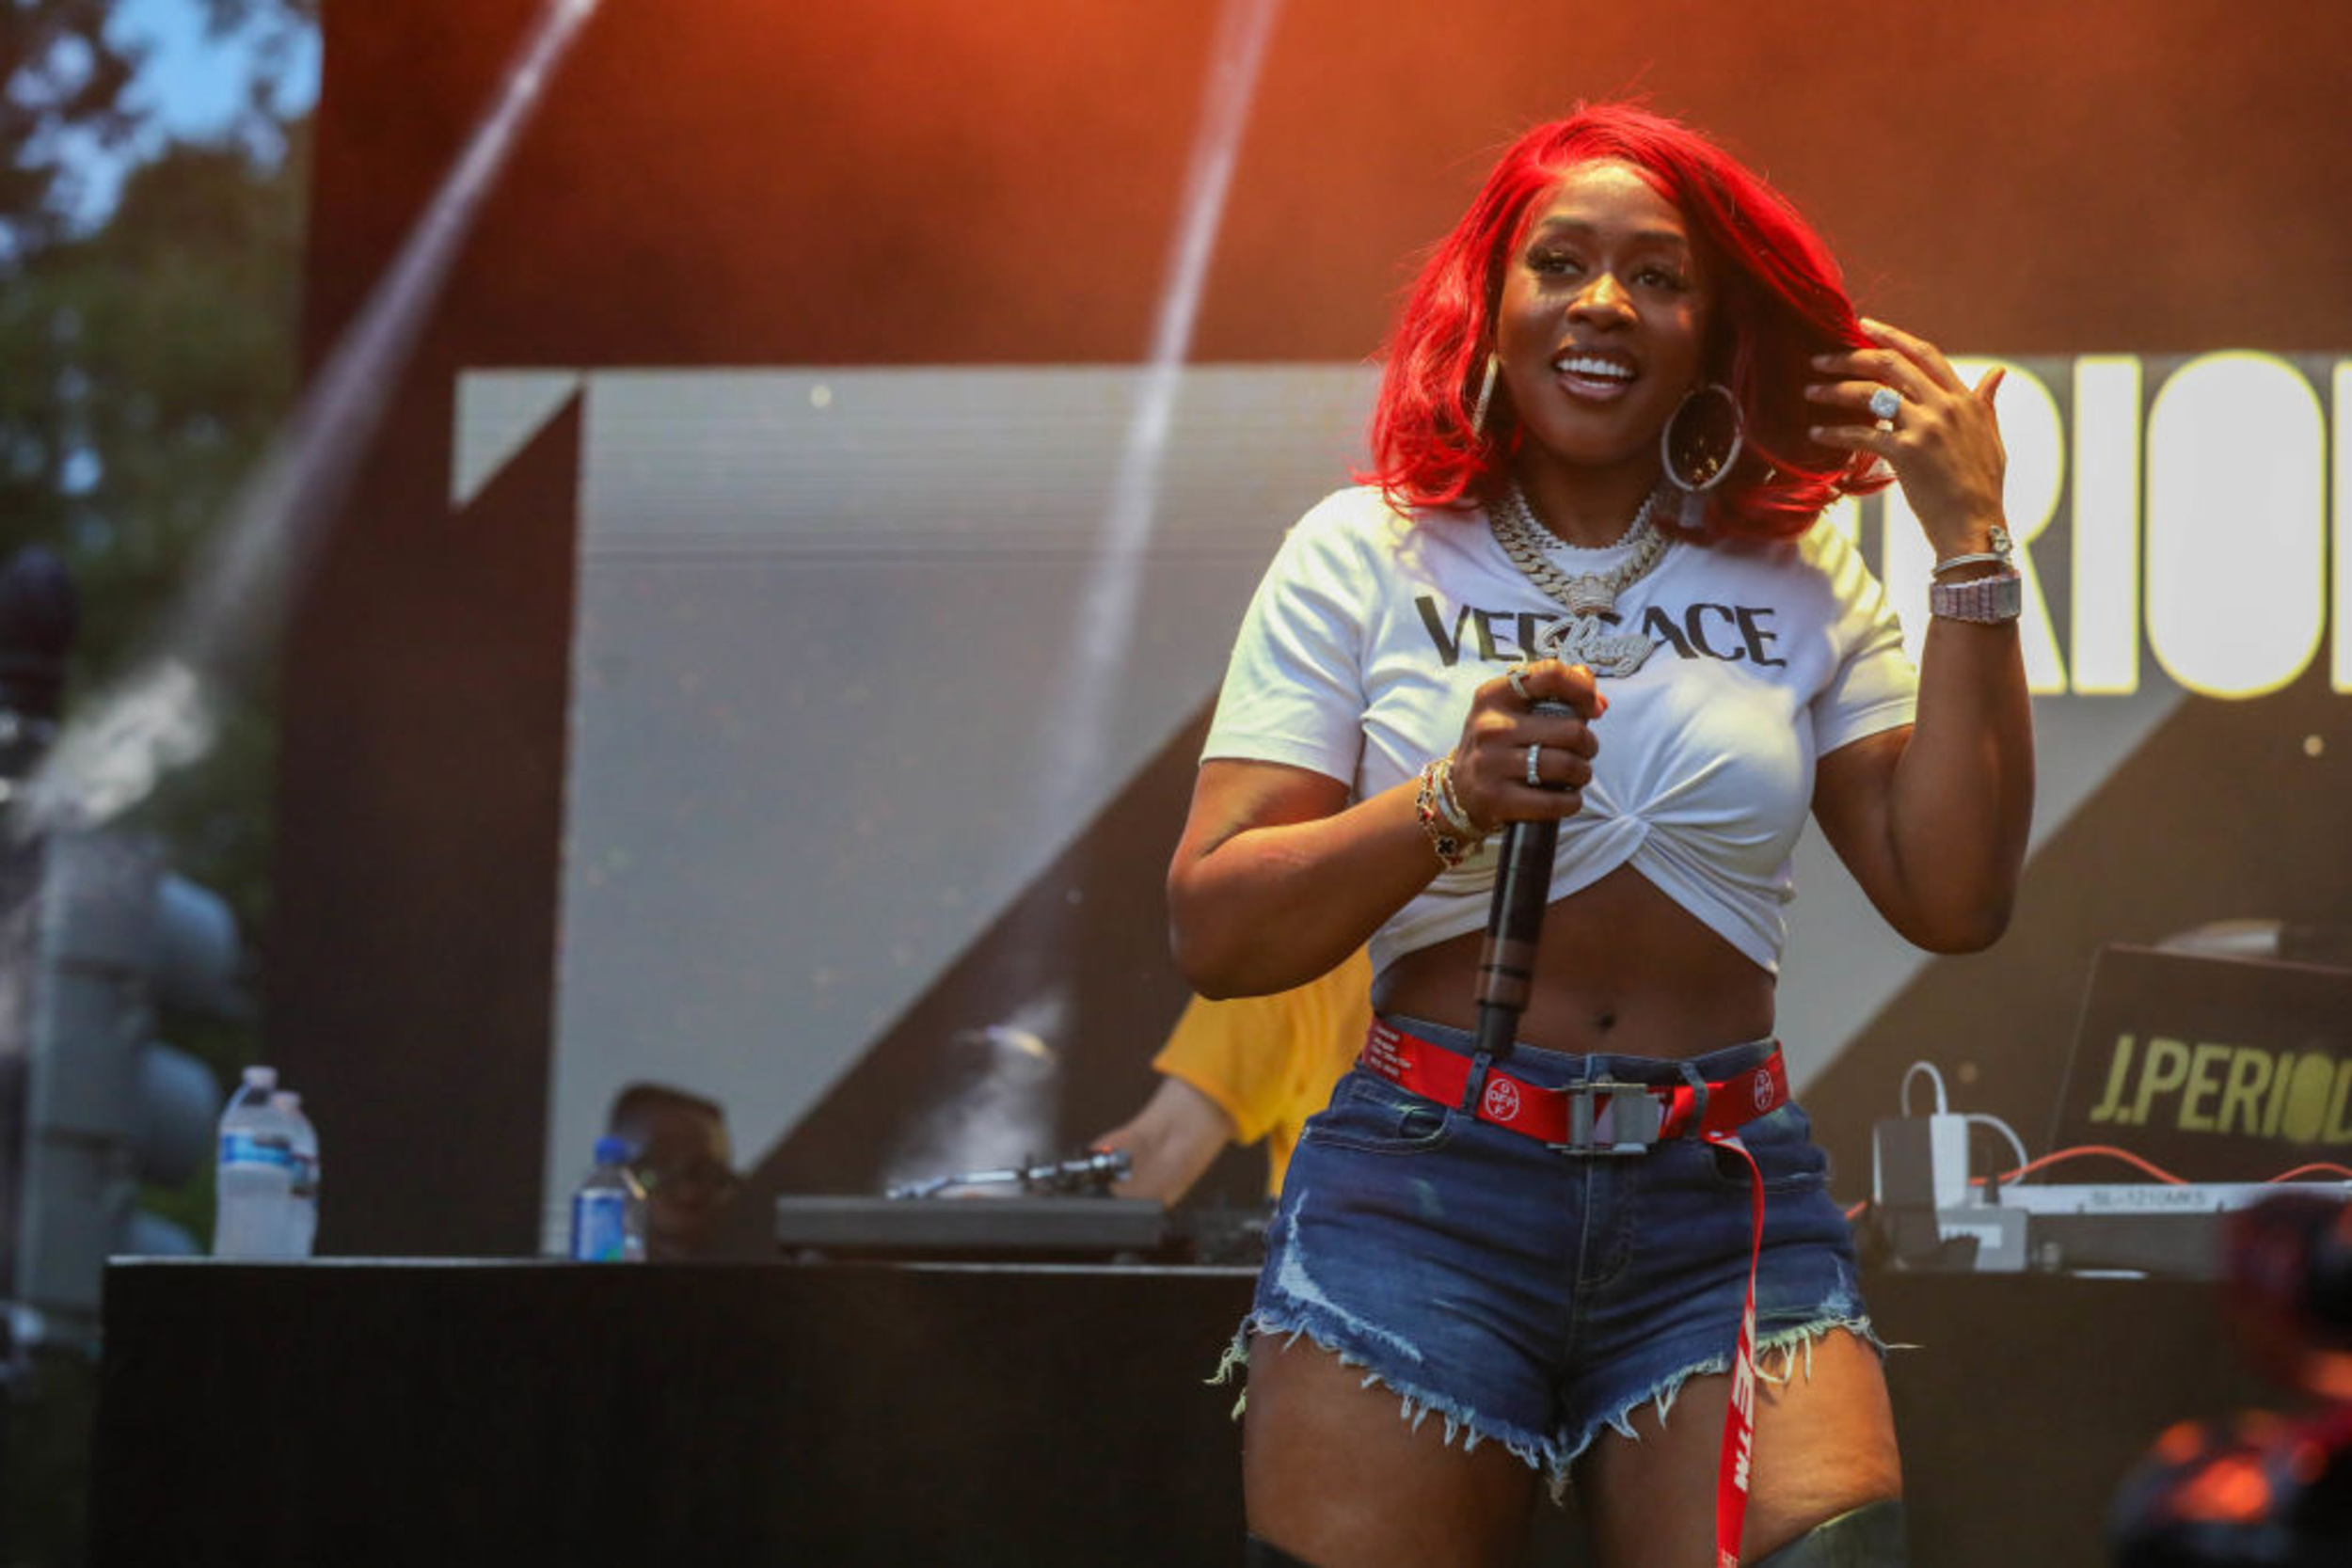 <p>Bronx native Remy Ma got her first break when she appeared on Big Pun’s sophomore album, <em>Yeeeah Baby.</em> Not too long after, Fat Joe signed Remy to his label, and she became a member of the hip-hop group Terror Squad. While the group’s 2004 single “Lean Back” earned Remy her first Grammy nomination, she’s also released solo hit records, including “Conceited” and <a href="https://www.youtube.com/watch?v=39nSx4Ly-K4" rel="noopener noreferrer">“Whuteva.”</a></p><p><a href='https://www.msn.com/en-us/community/channel/vid-cj9pqbr0vn9in2b6ddcd8sfgpfq6x6utp44fssrv6mc2gtybw0us'>Follow us on MSN to see more of our exclusive entertainment content.</a></p>